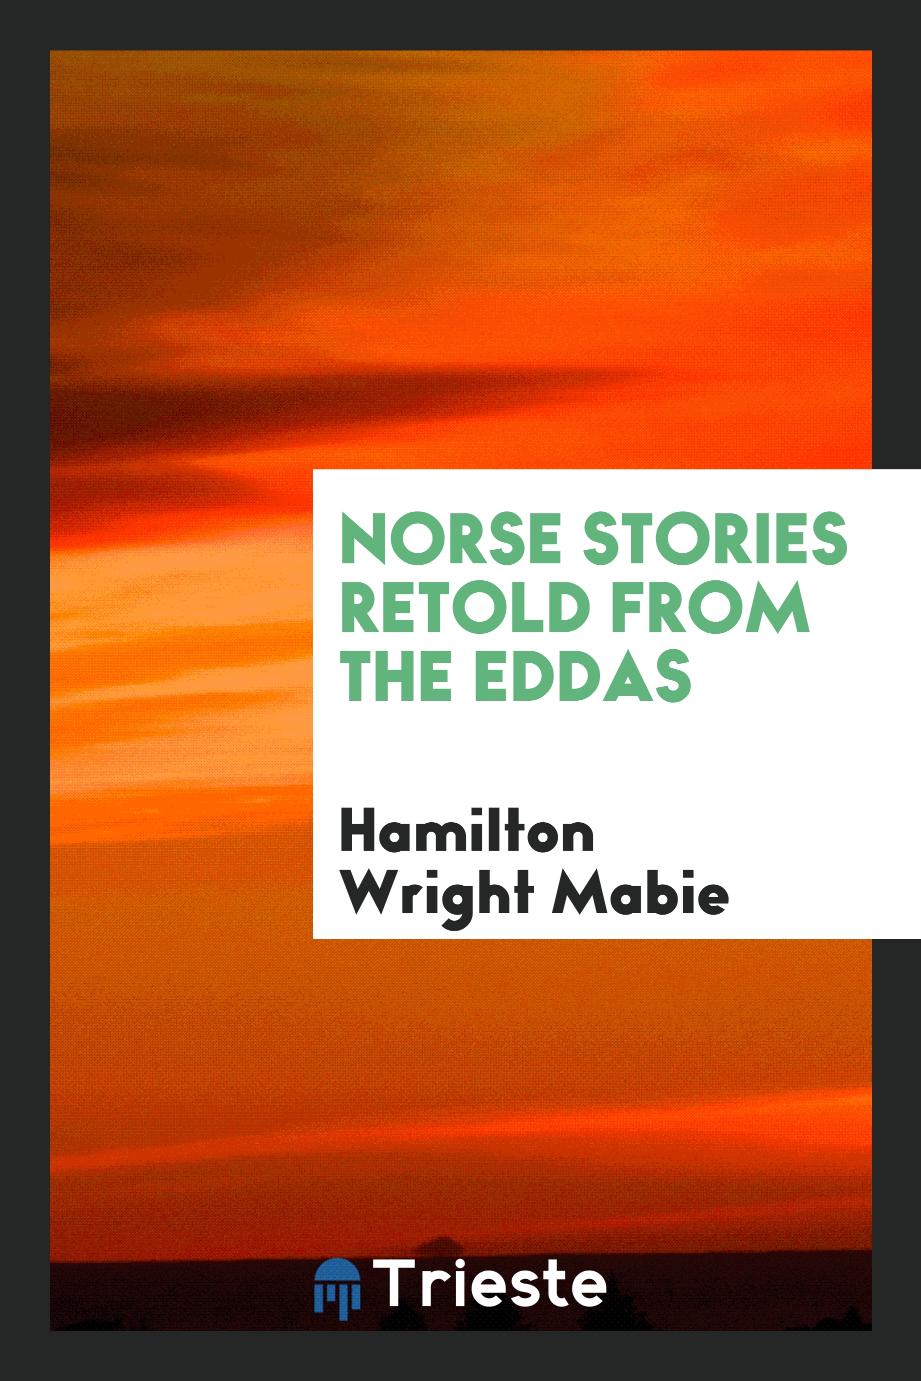 Hamilton Wright Mabie - Norse stories retold from the Eddas